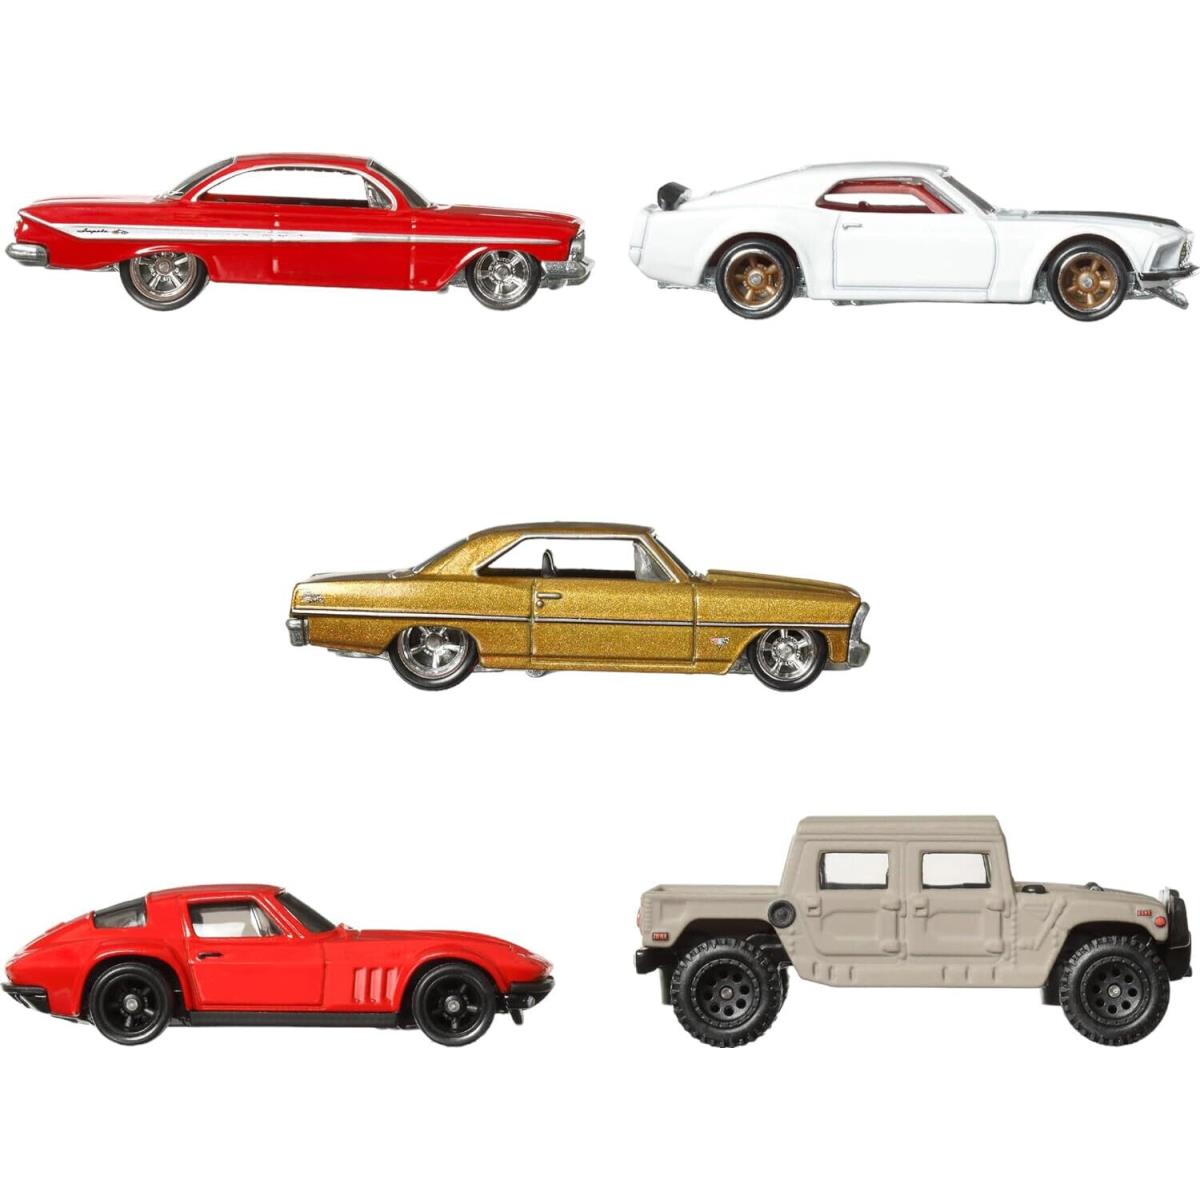 Hot Wheels Premium Fast Furious 1:64 Scale 5-Pack Die-cast Toy Cars